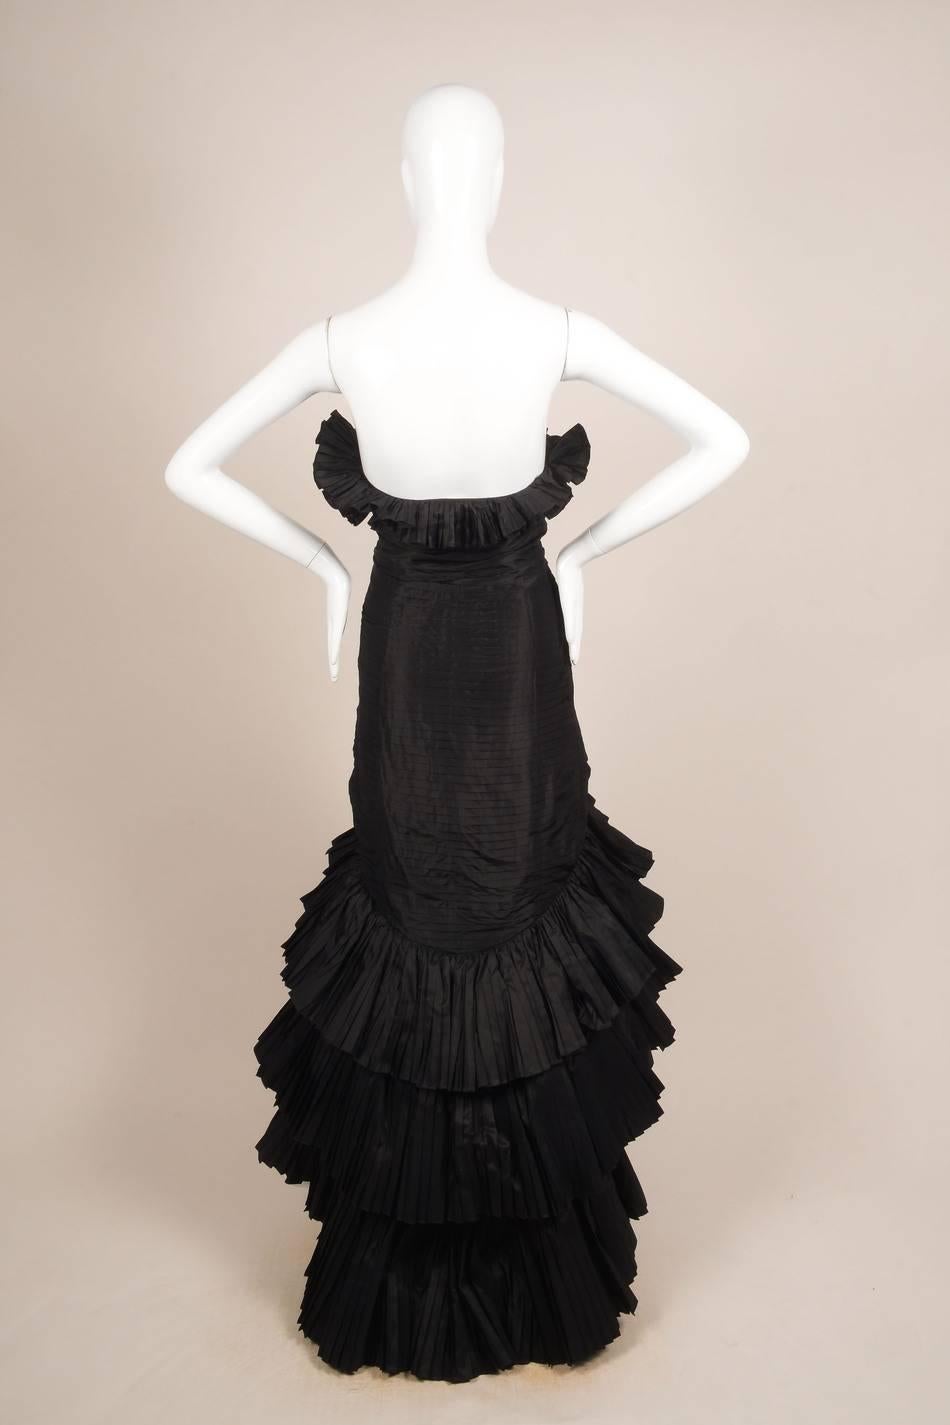 Strapless. Full-length. Accordion pleating detail throughout. Ruffle pleated trim around bust. Layred tiered pleating down skirt. Tulle inserts in between skirt layers. Hidden side zip closure with hook-and-eye closure. Lined. 

Size: Unknown